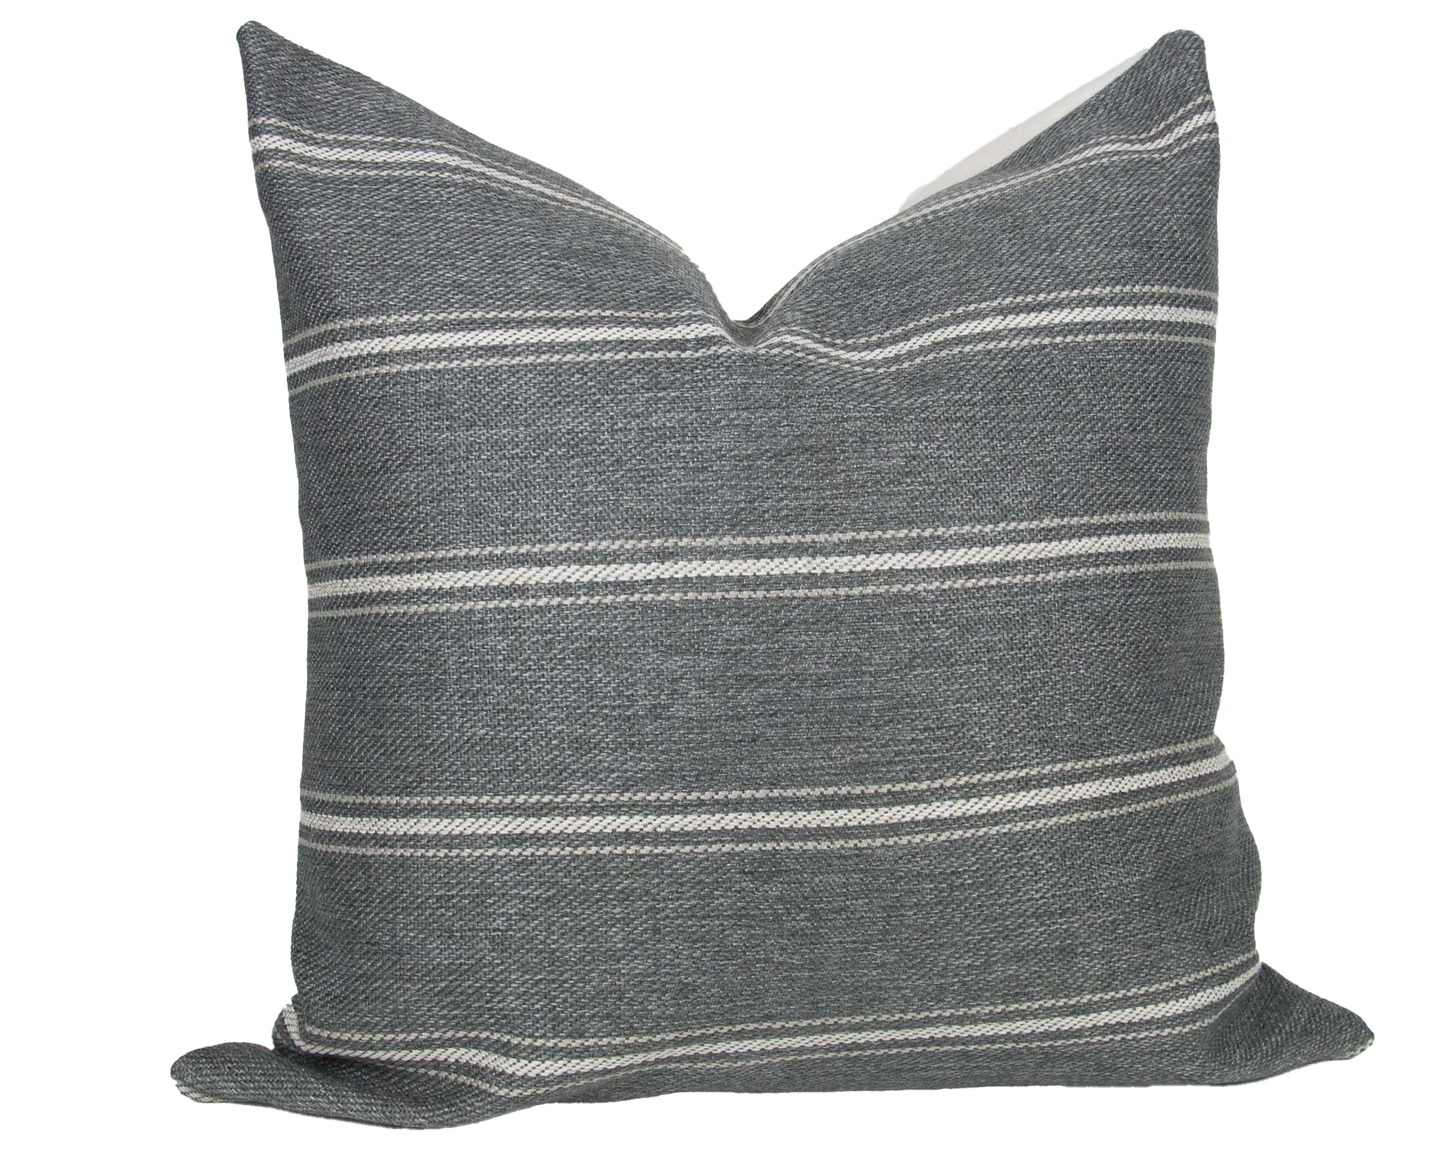 Grey Woven Striped Textured Pillow Cover, 20x20"